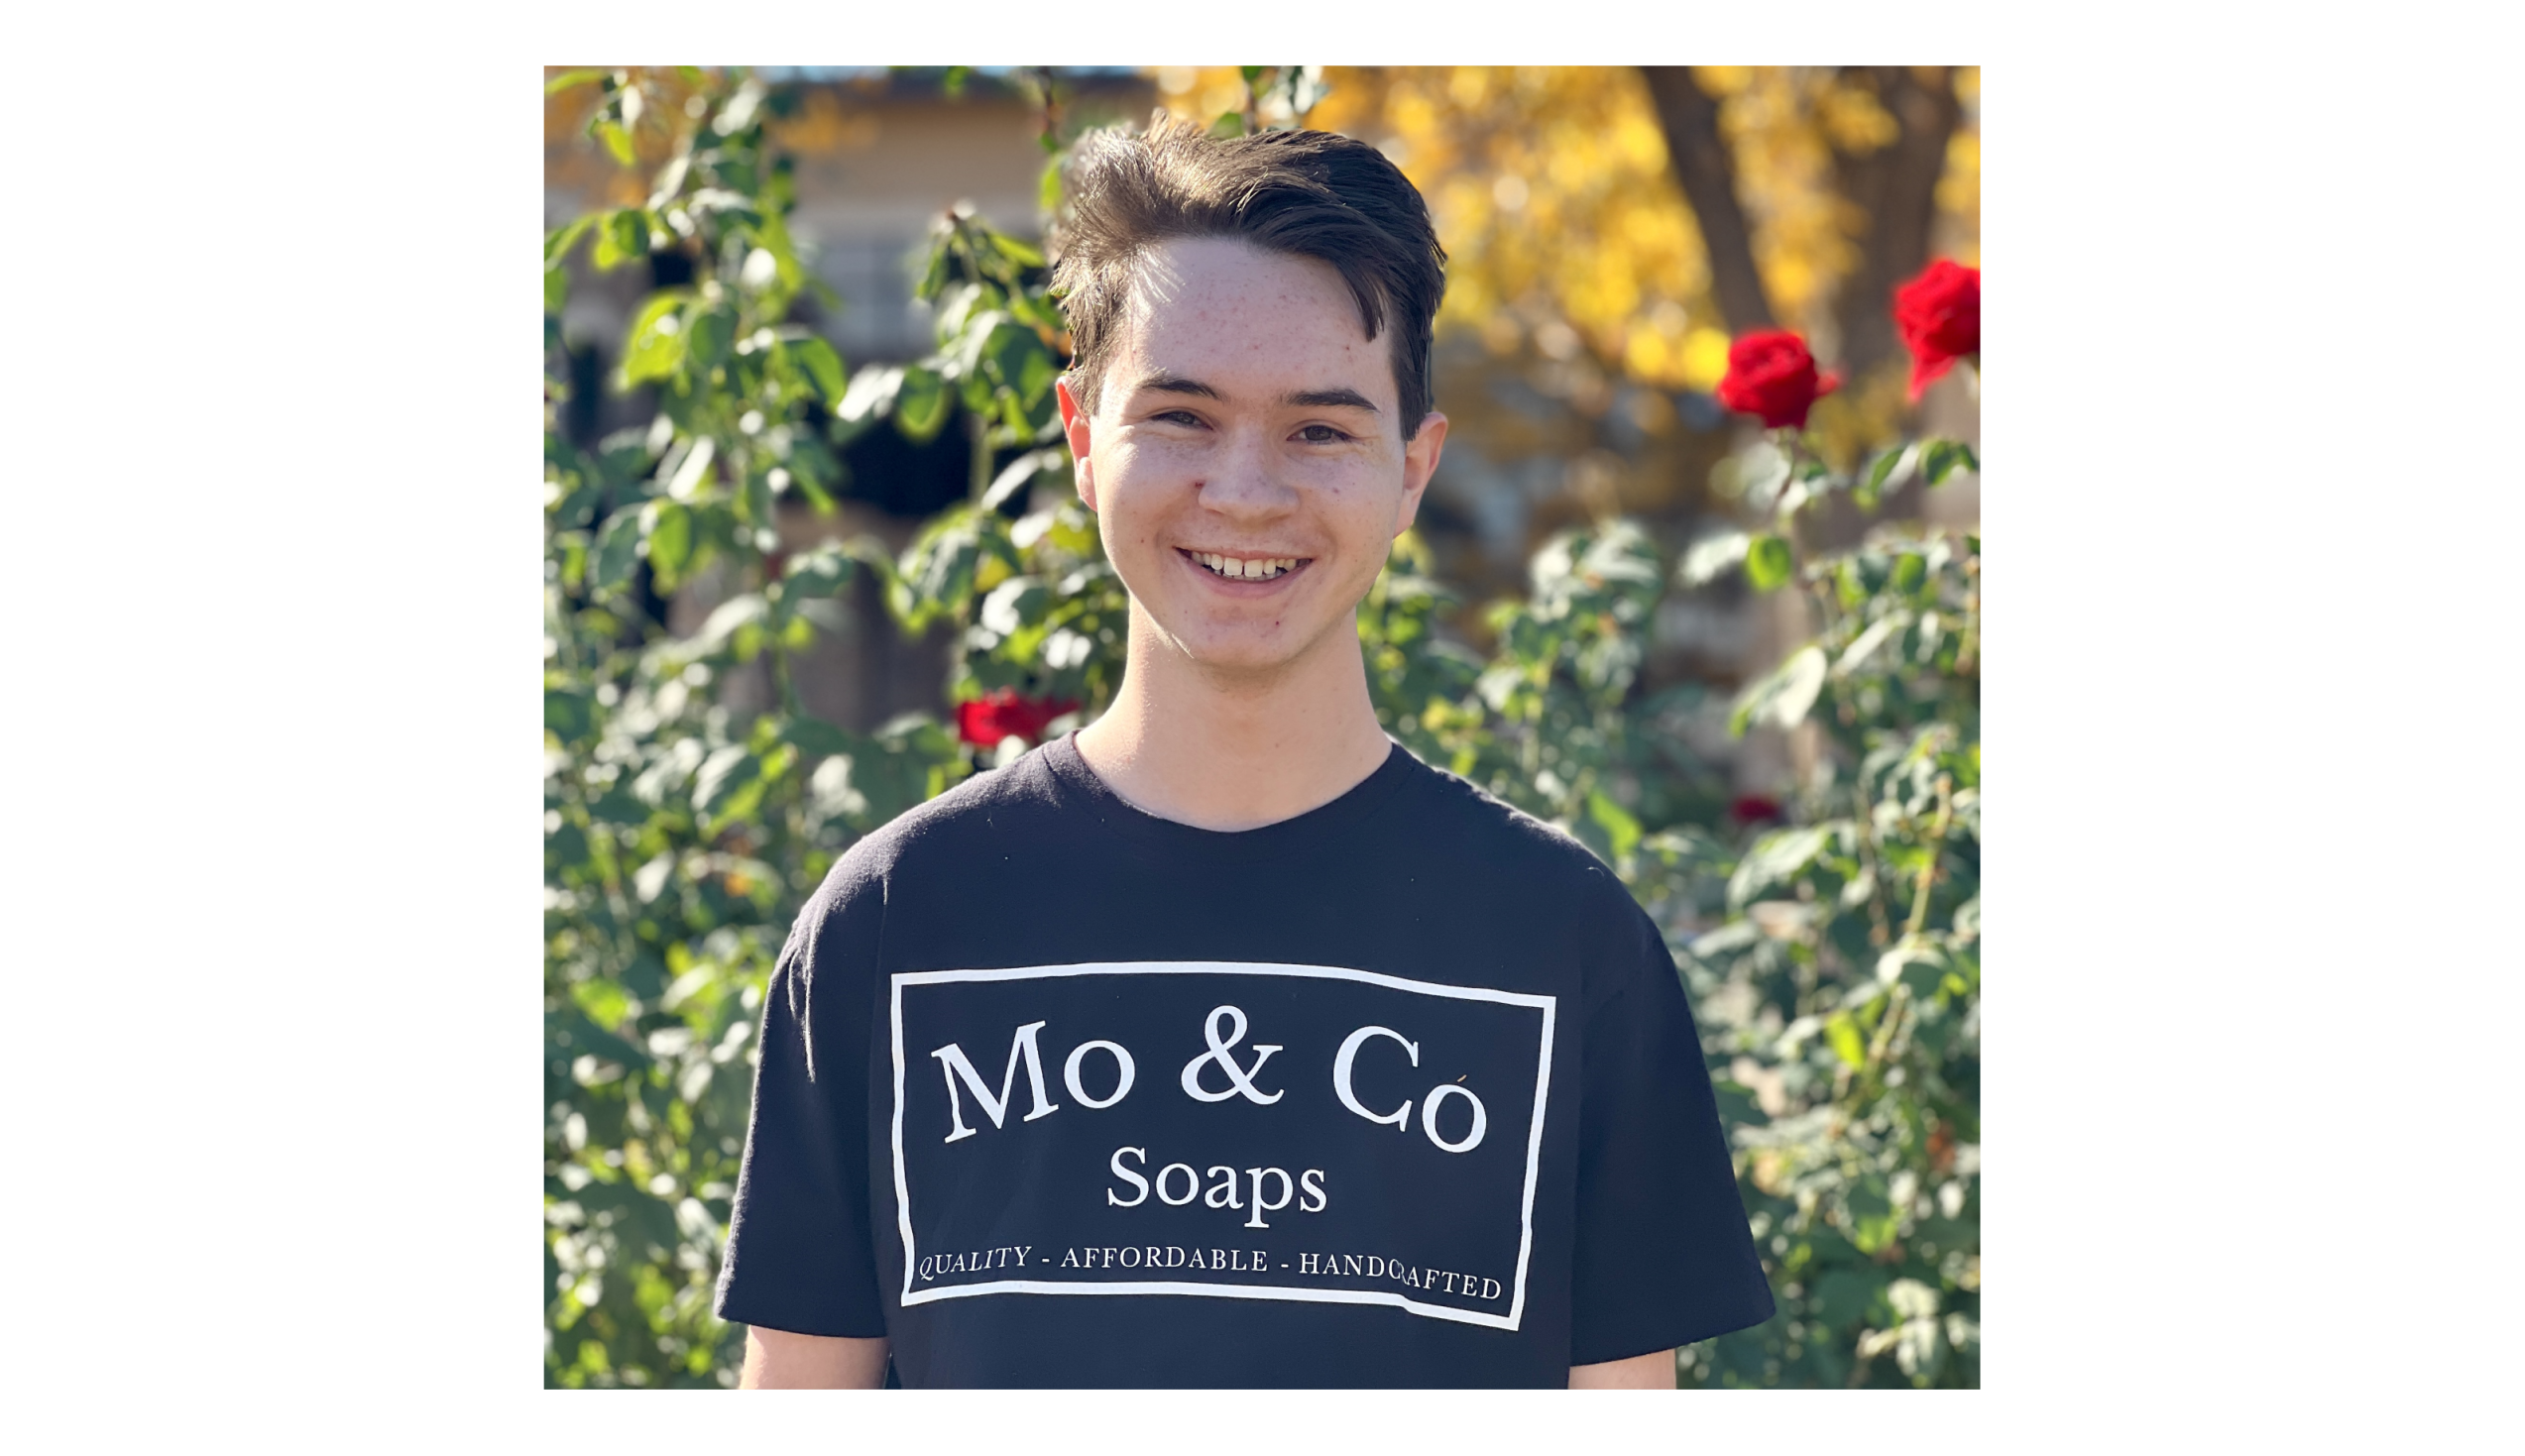 The First Affordable, All in One Bar Soap - Mo & Co Soaps